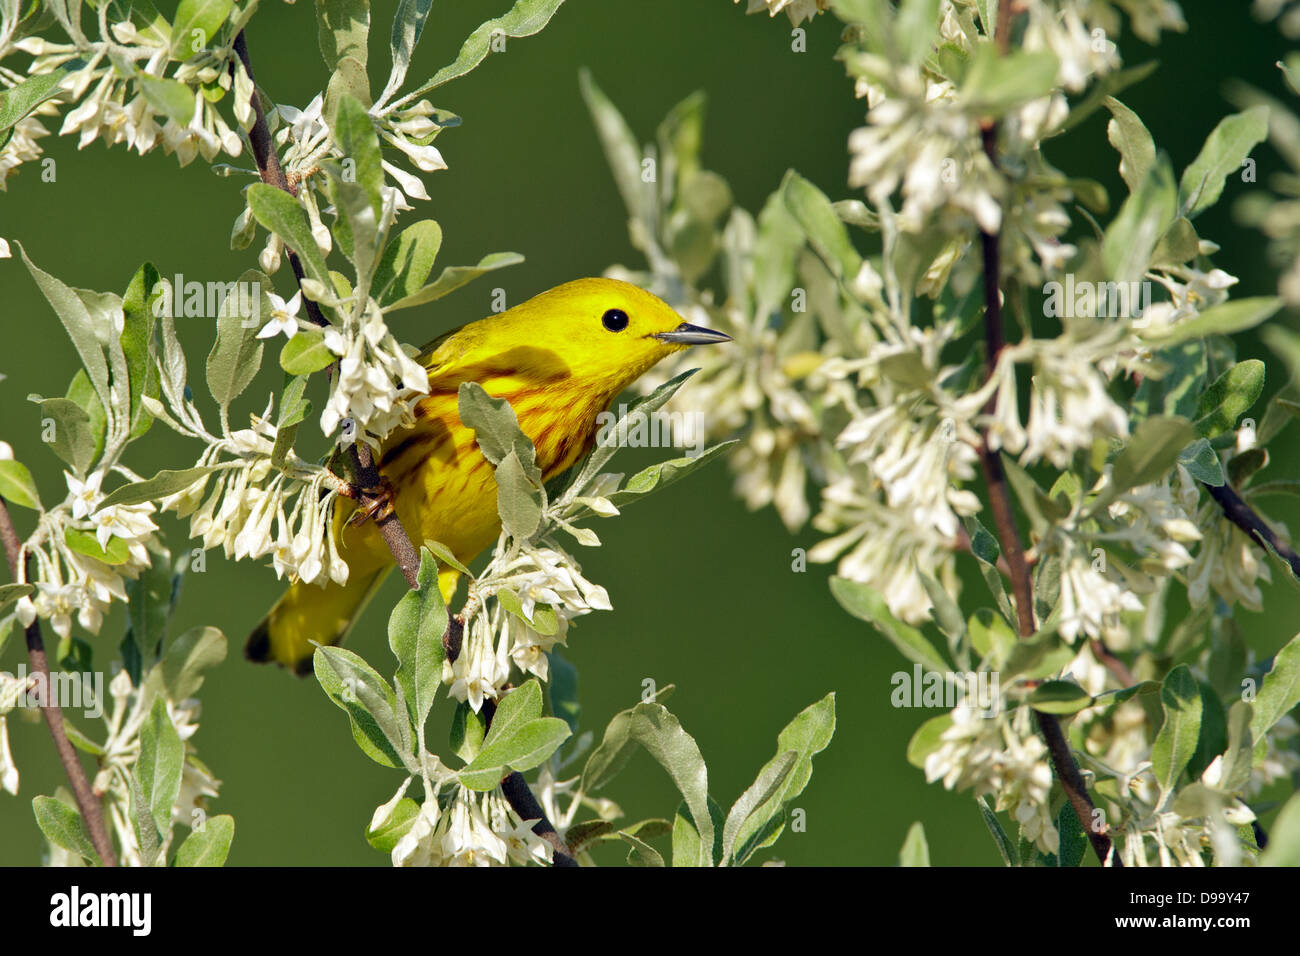 Yellow Warbler perching in Autumn Olive Blossoms bird songbird Ornithology Science Nature Wildlife Environment Stock Photo